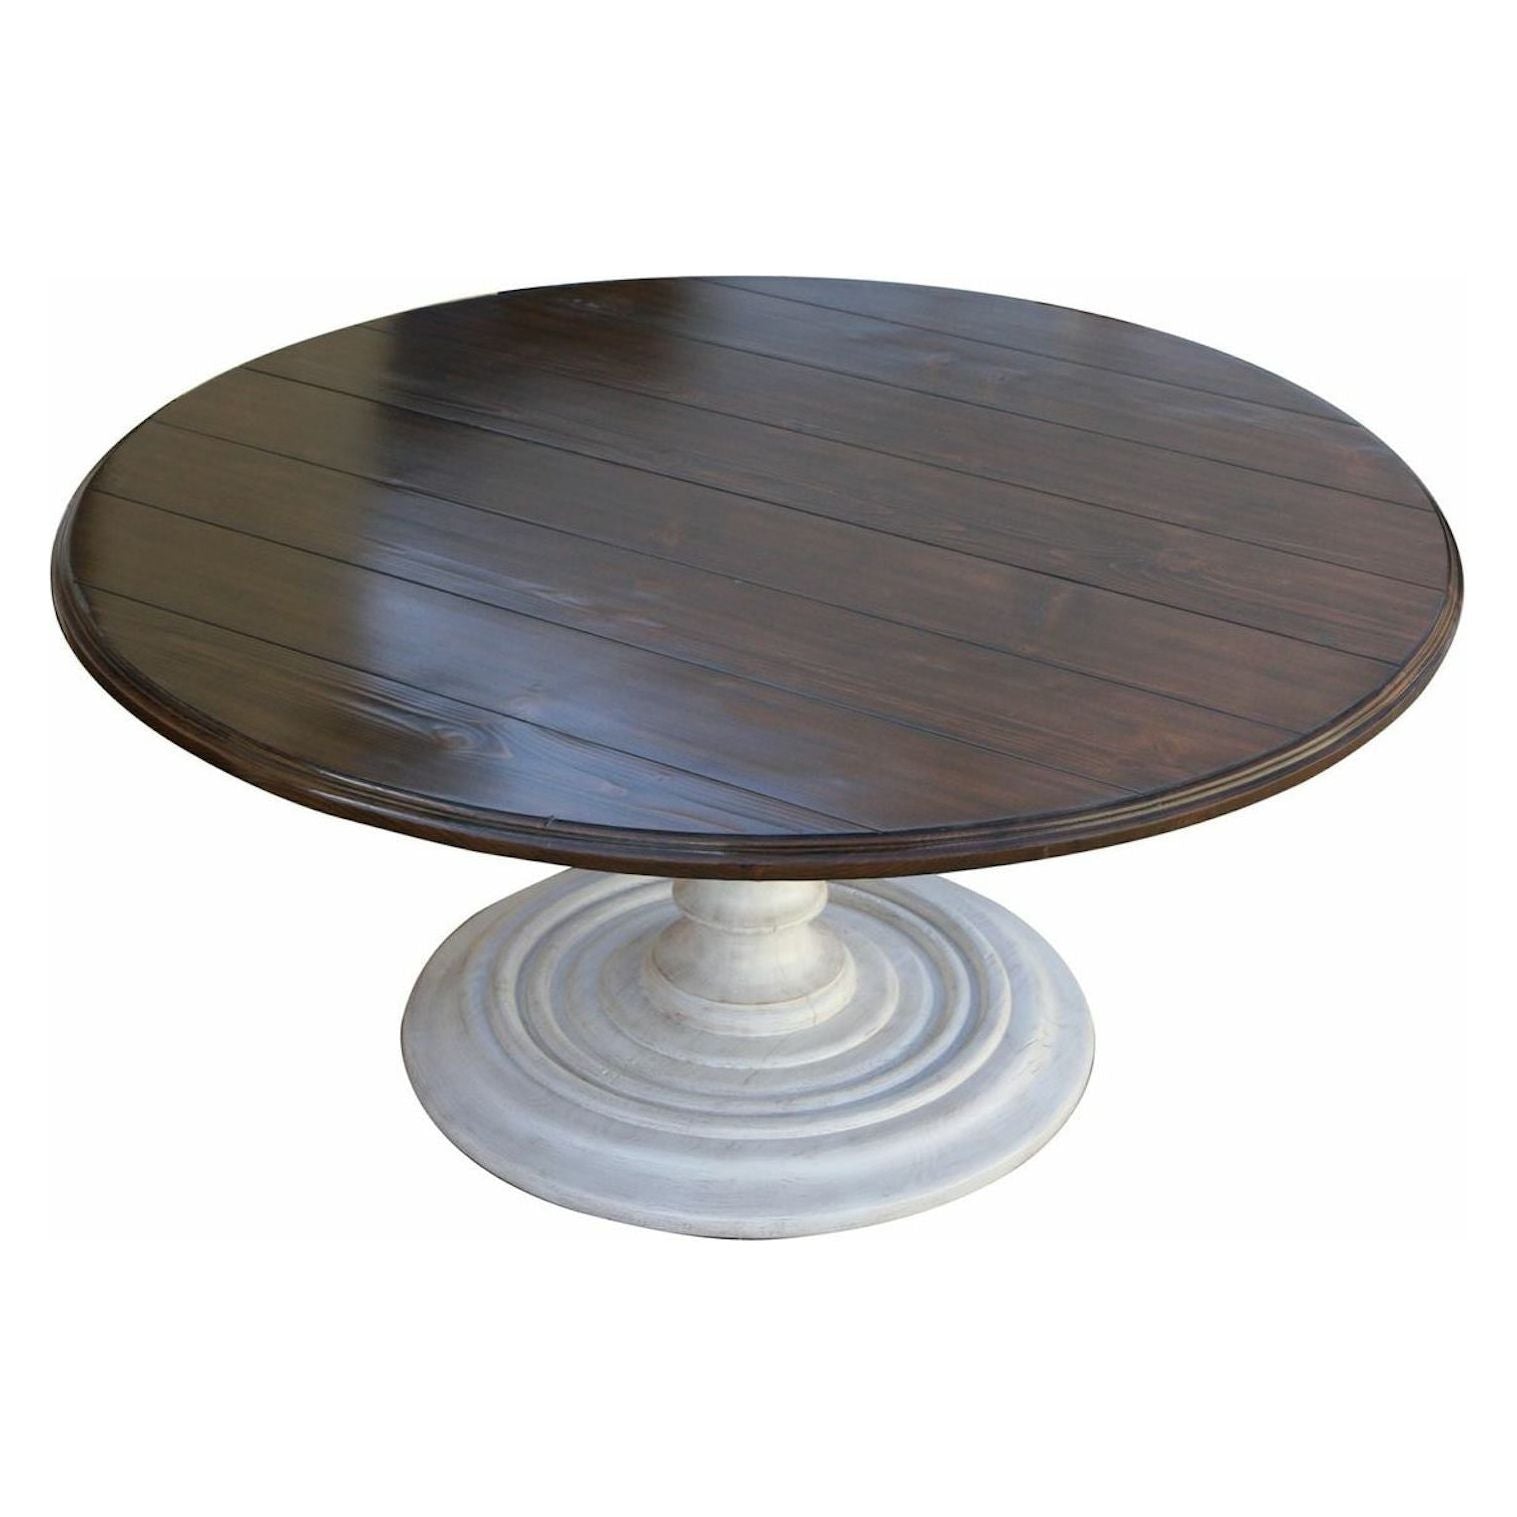 Salvaged Wood Plank Round Dining Table